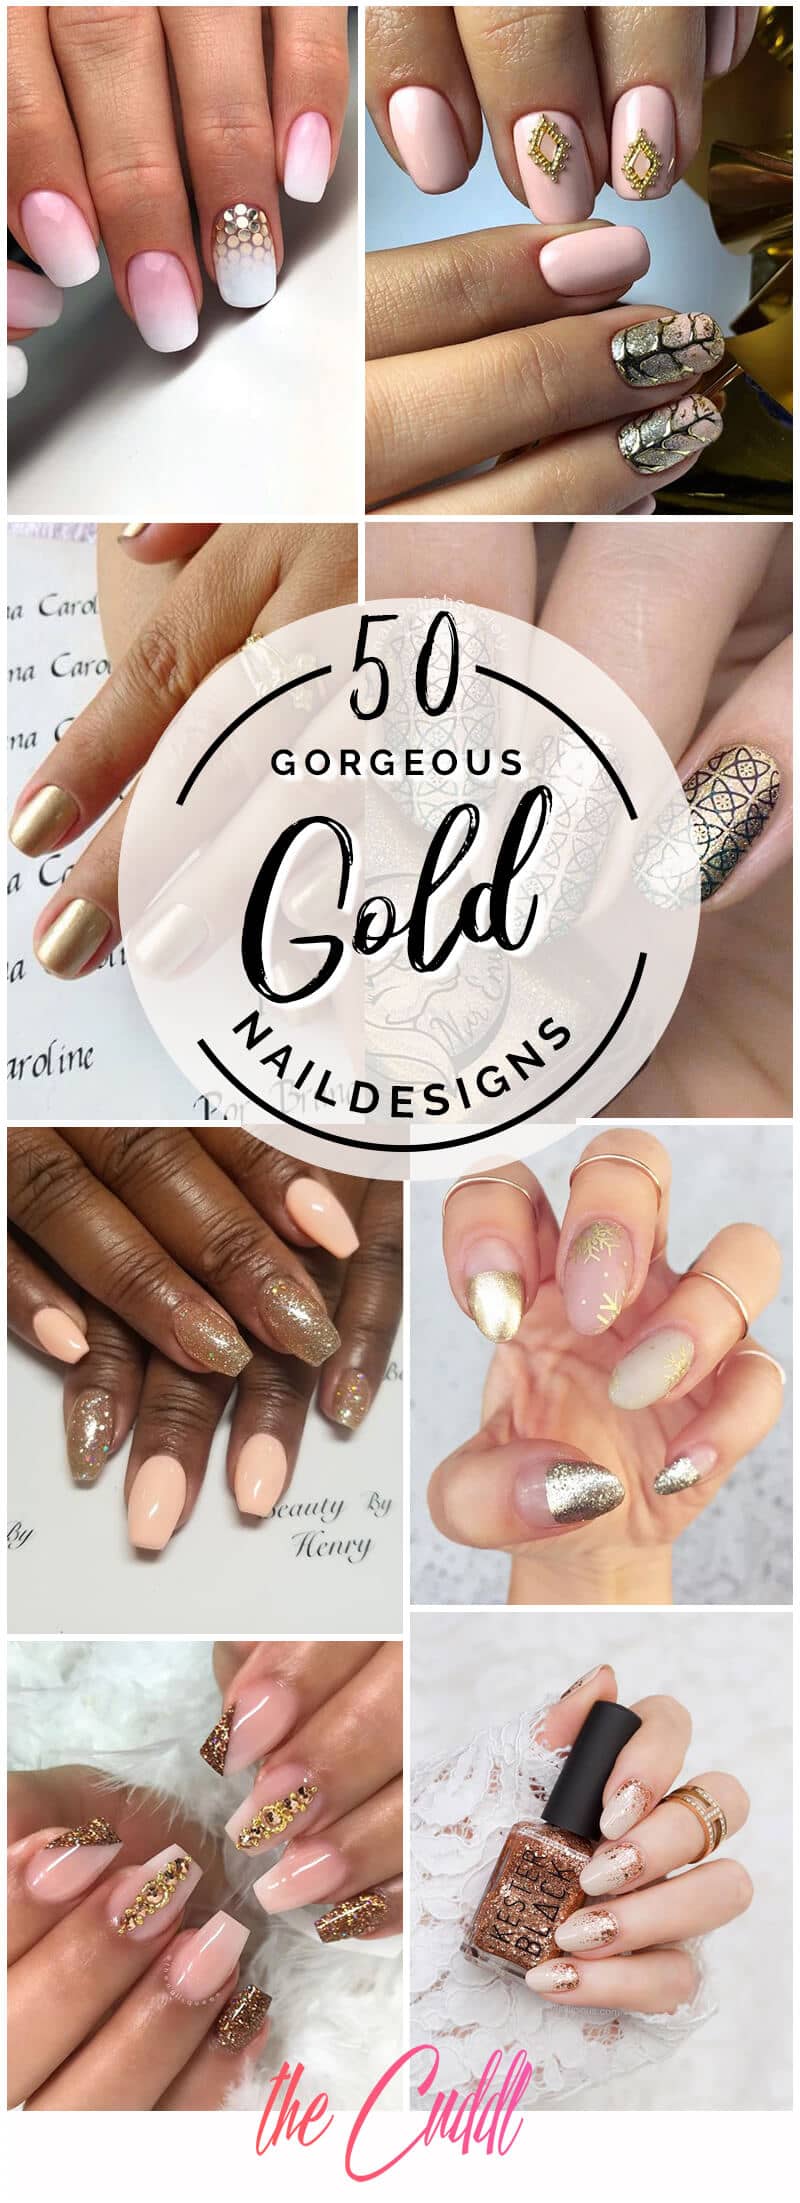 50 Hottest Gold Nail Designs to Spice Up Your Nail Inspirations